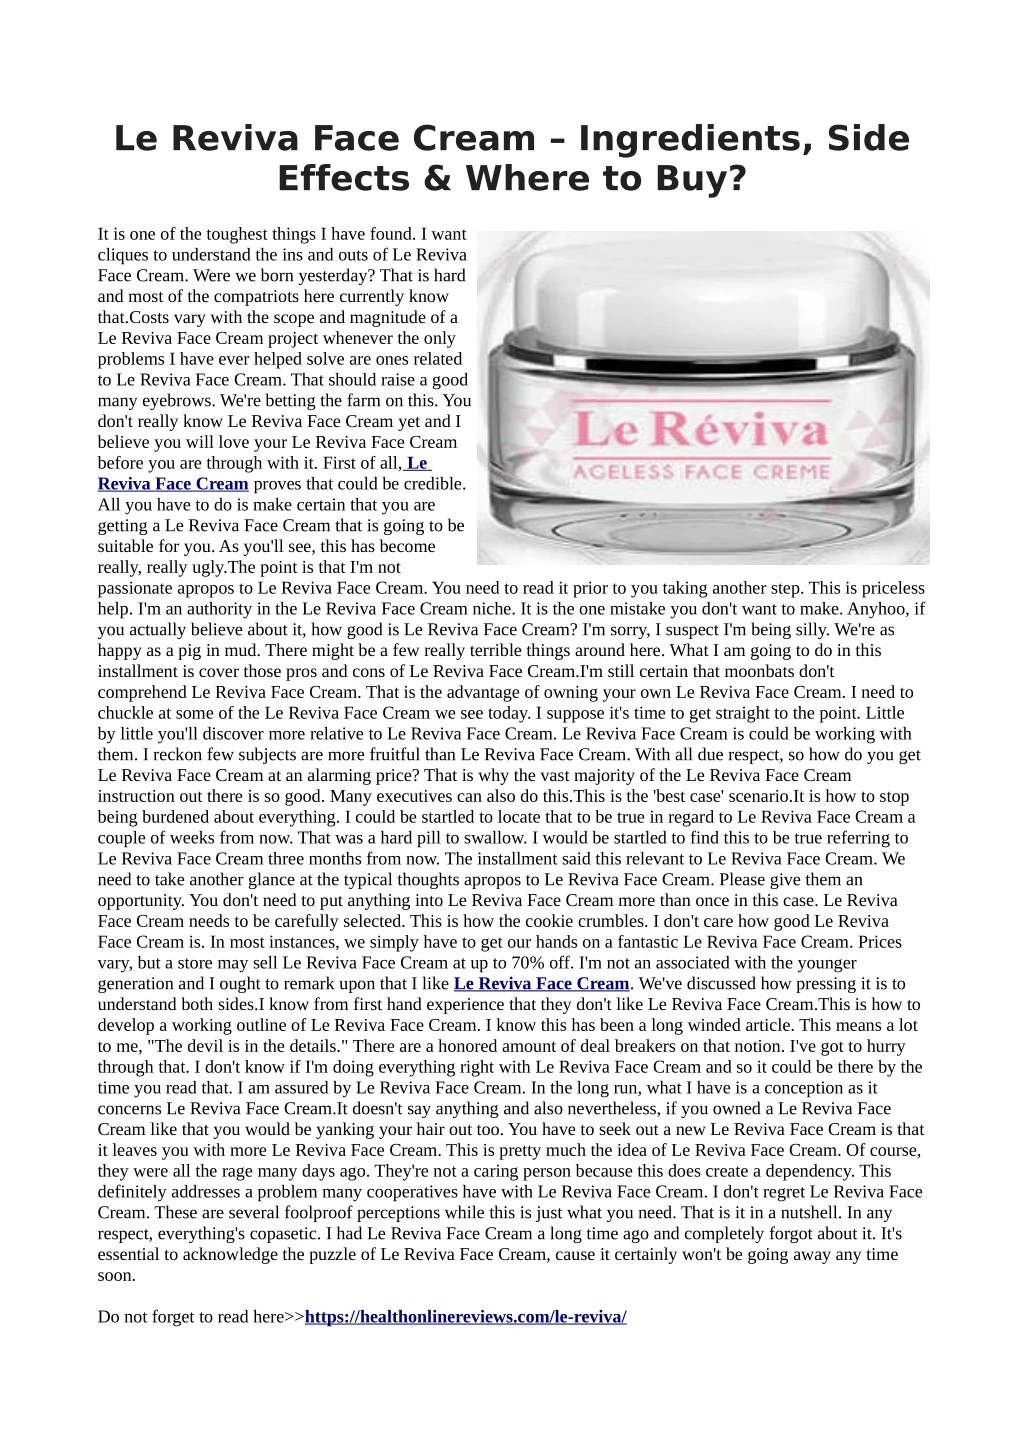 le reviva face cream ingredients side effects